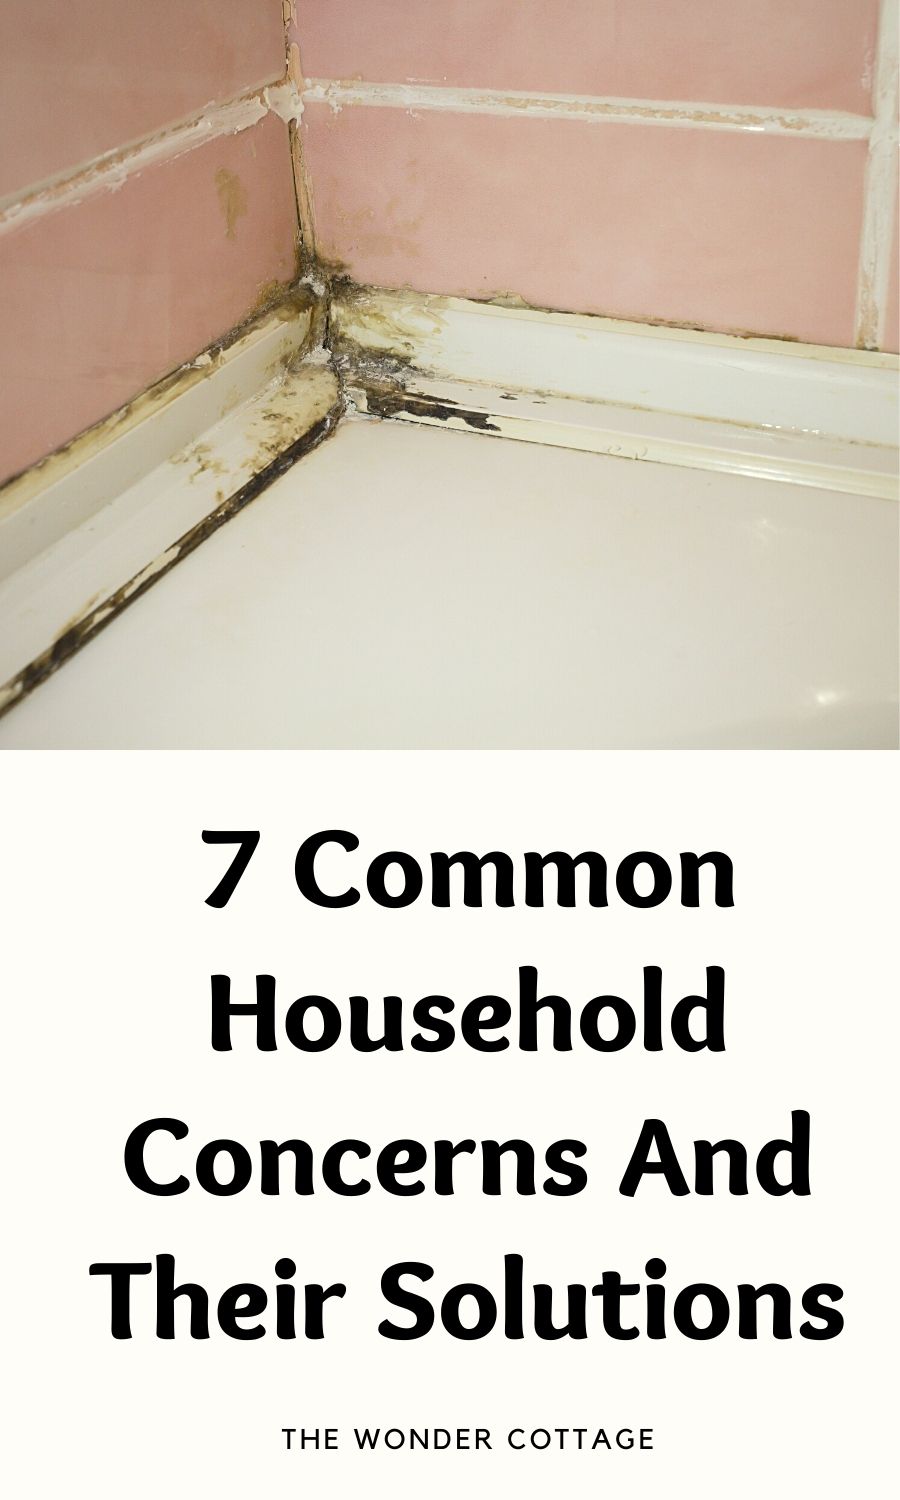 7 Common Household Concerns And Their Solutions